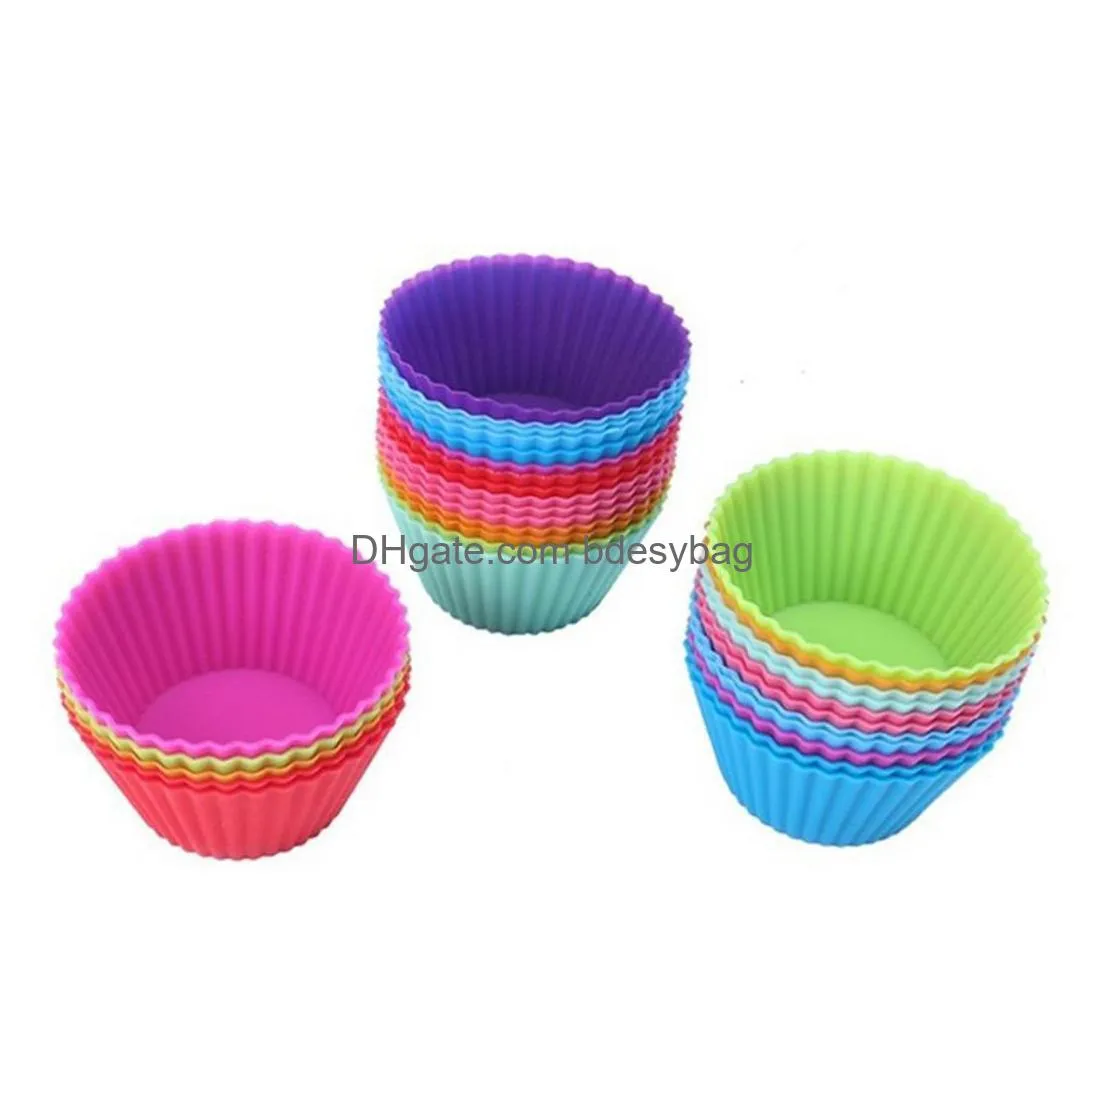 set of 12 pieces (1 dozen) round shaped silicon cake baking molds jelly mold cupcake pan muffin cup